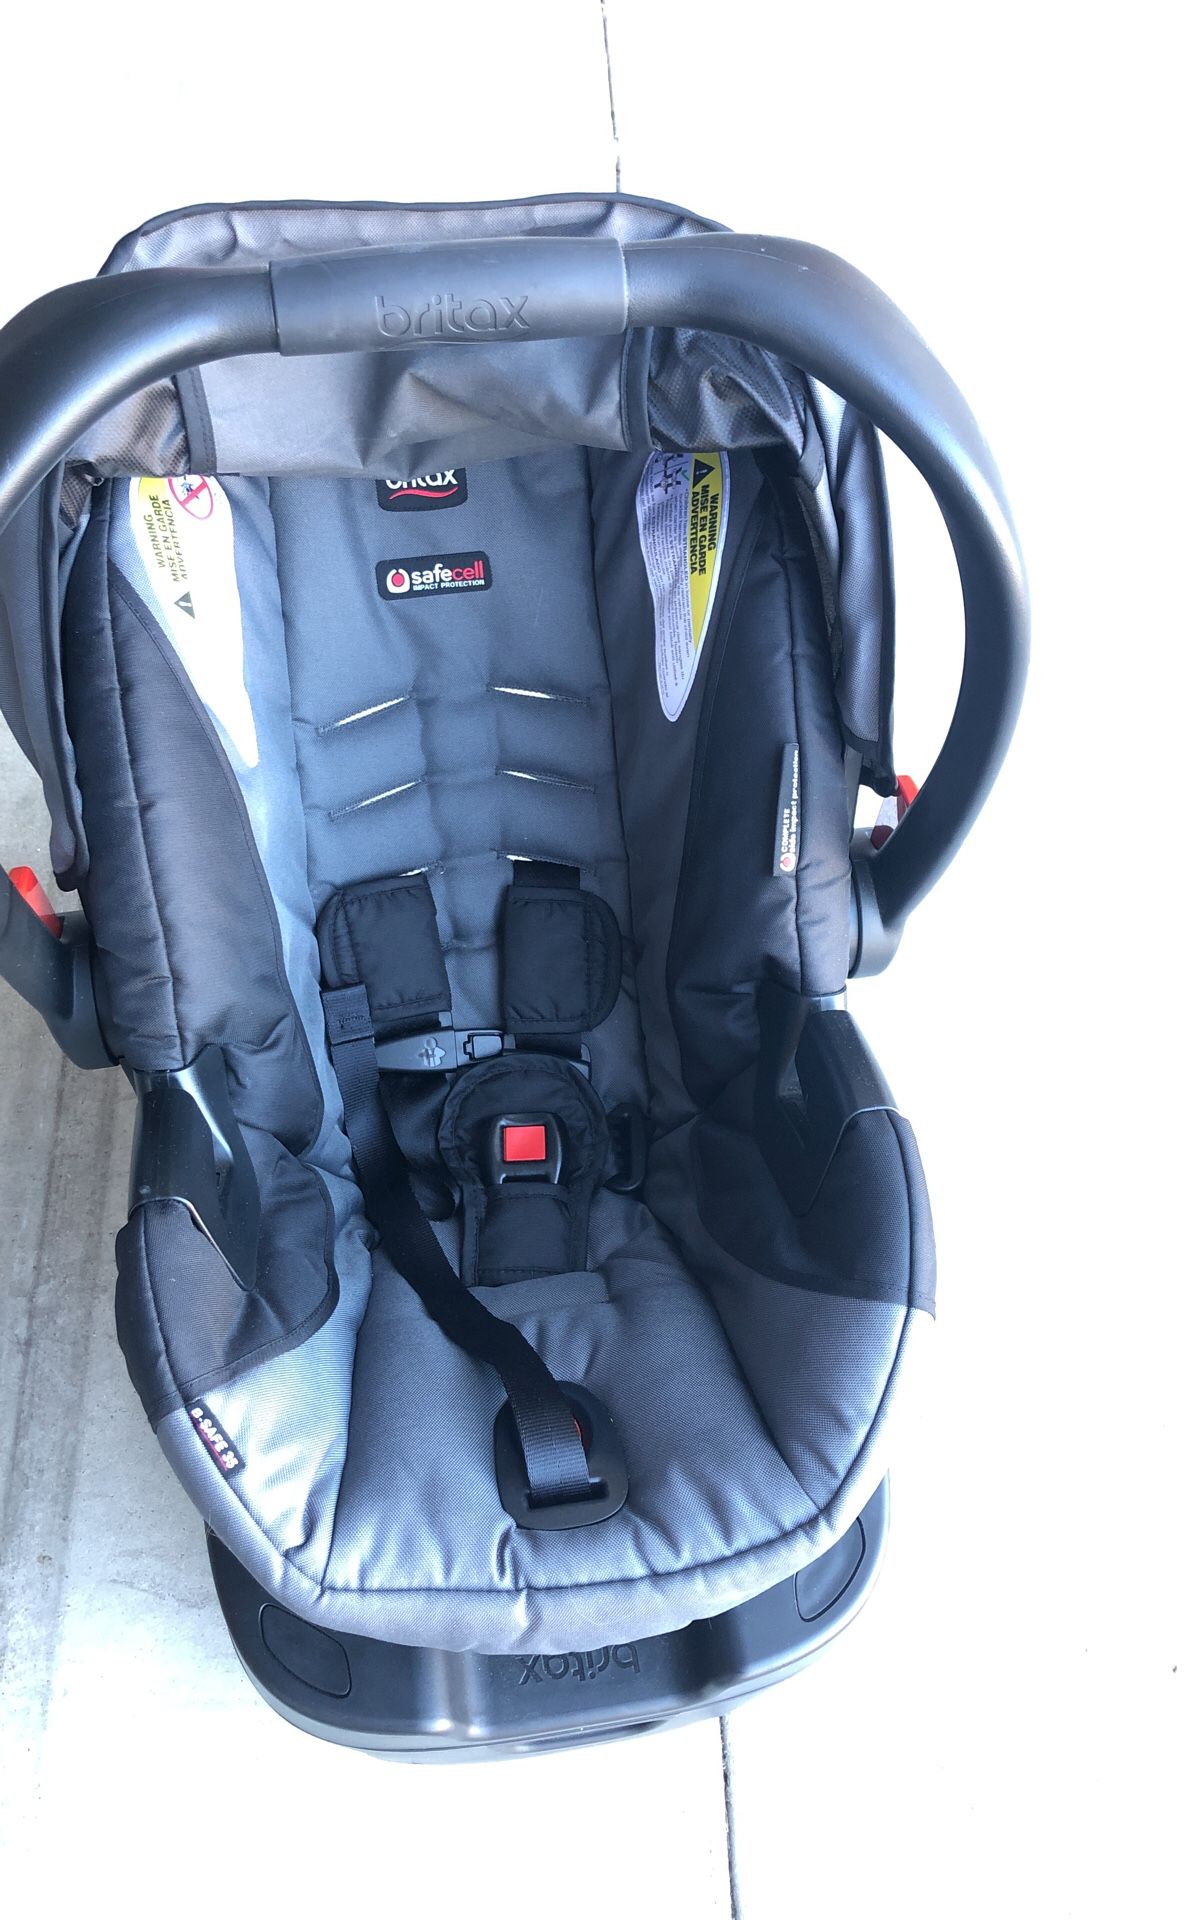 Britax infant car seat $50 OBO (brand new) and base (retails $199+)